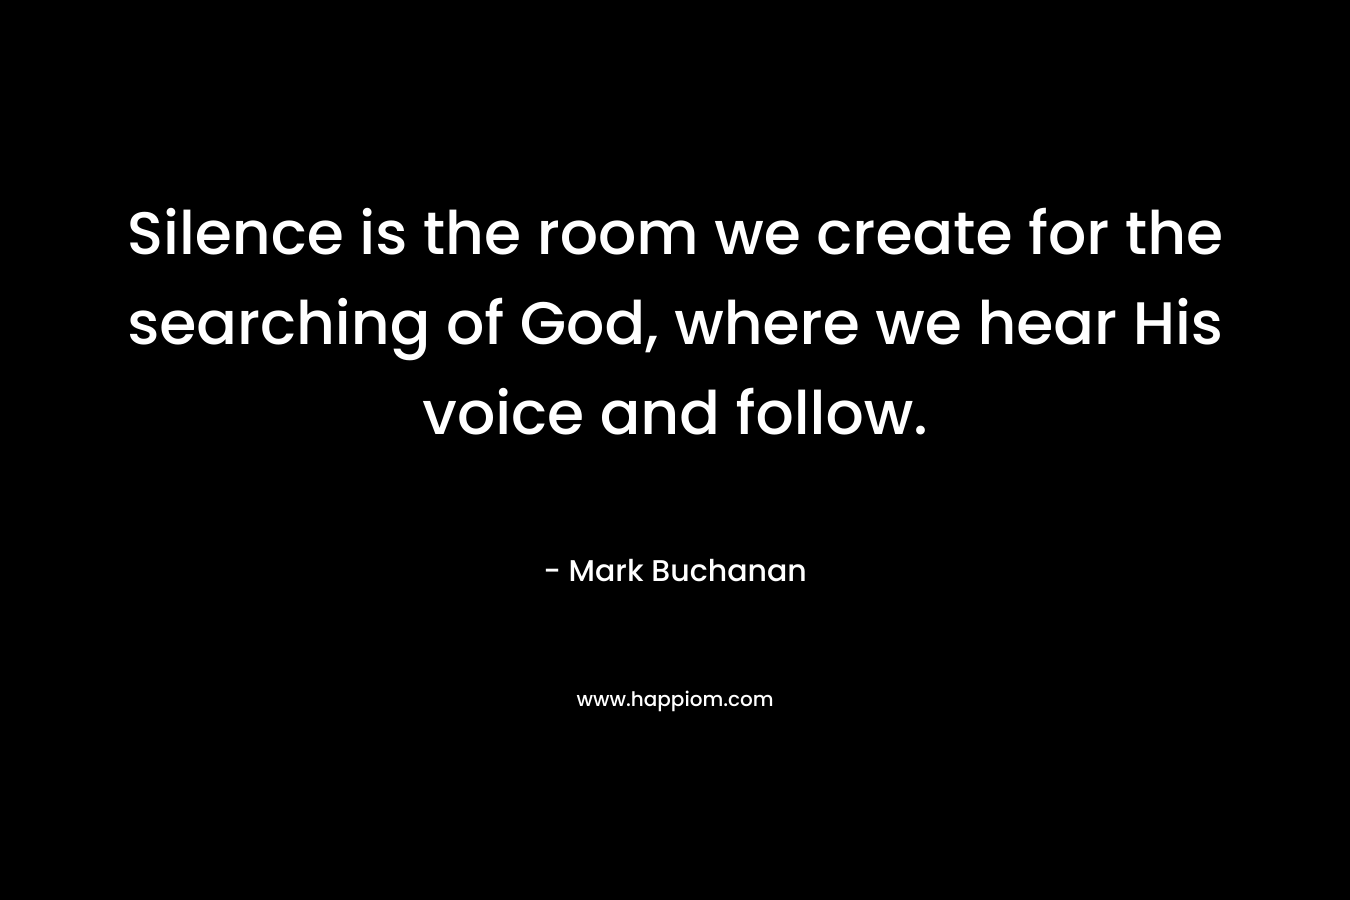 Silence is the room we create for the searching of God, where we hear His voice and follow.